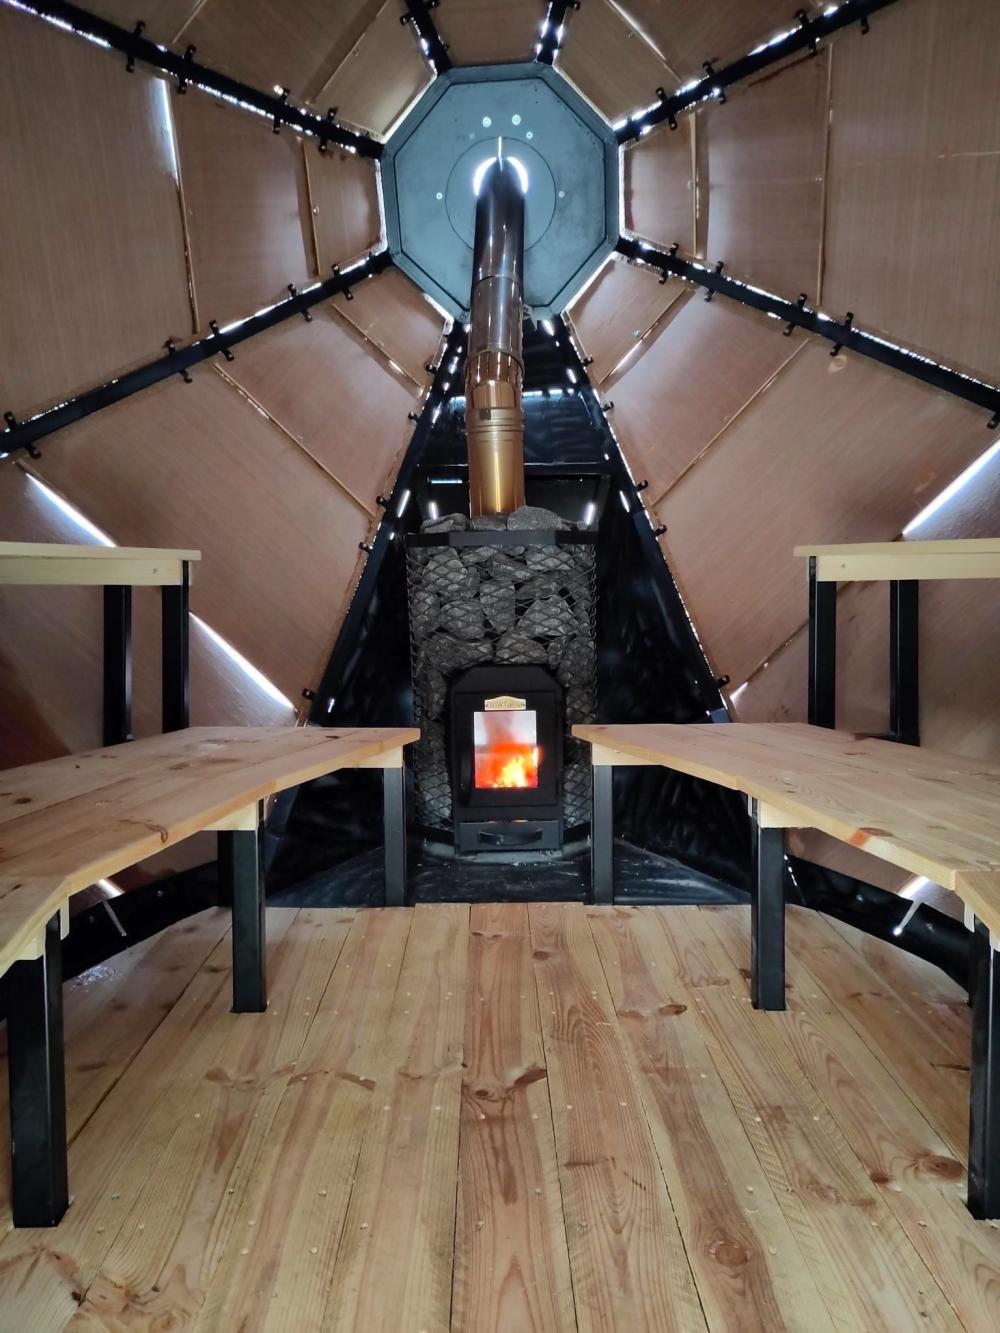 Inside the sauna: a wooden bench on either side and a fire in the middle